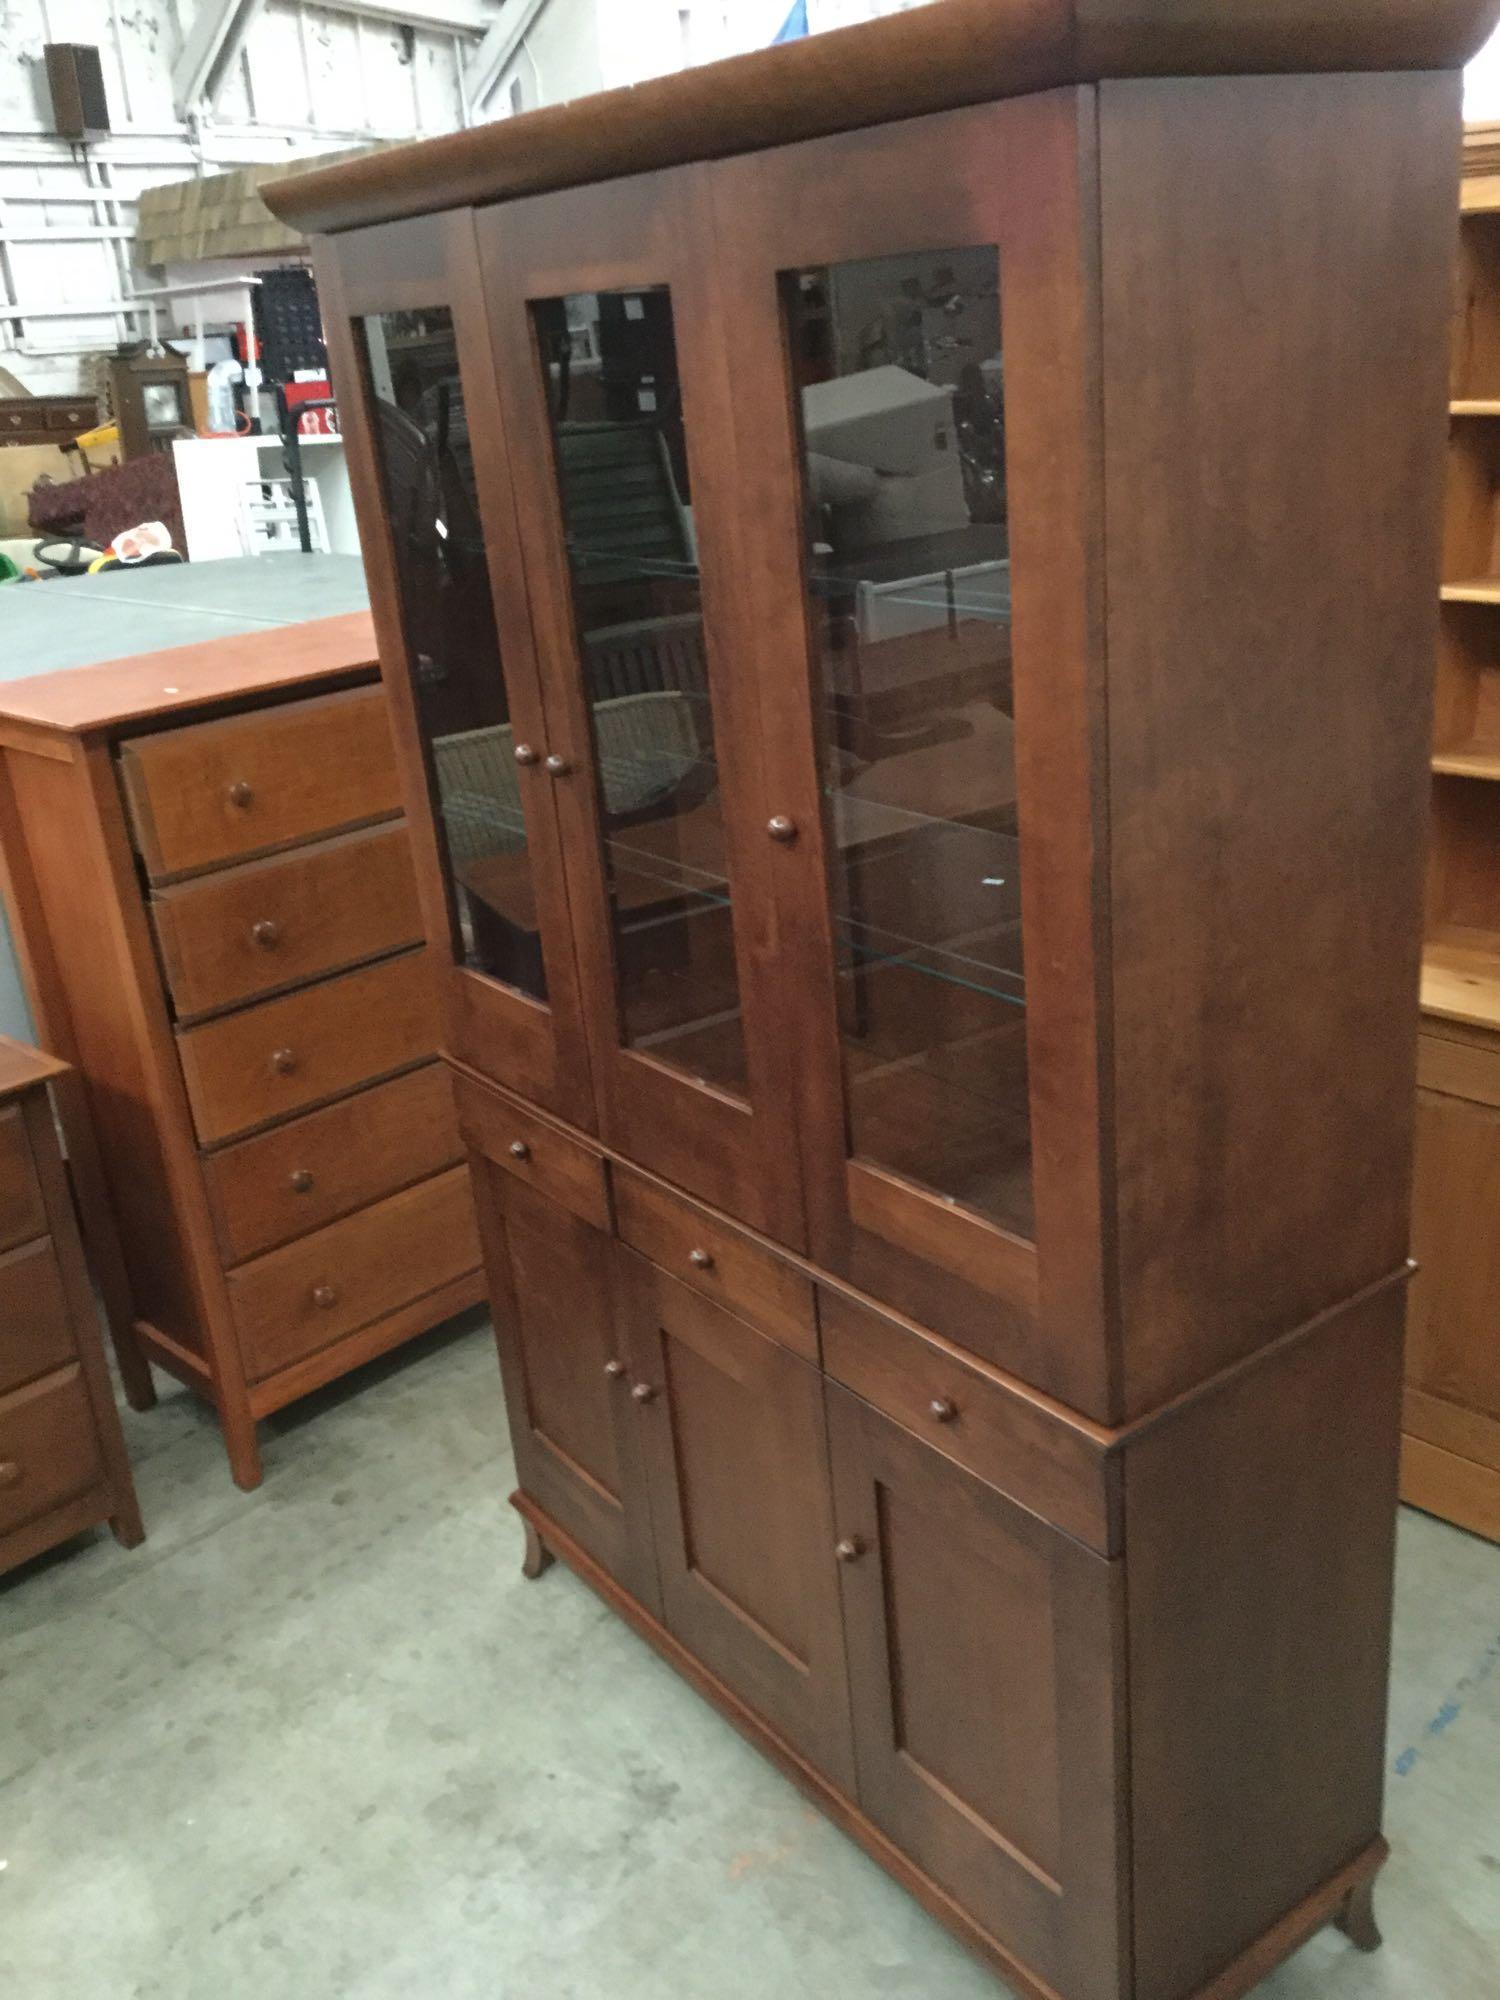 Modern burnished walnut stain china hutch with glass front doors and glass shelves